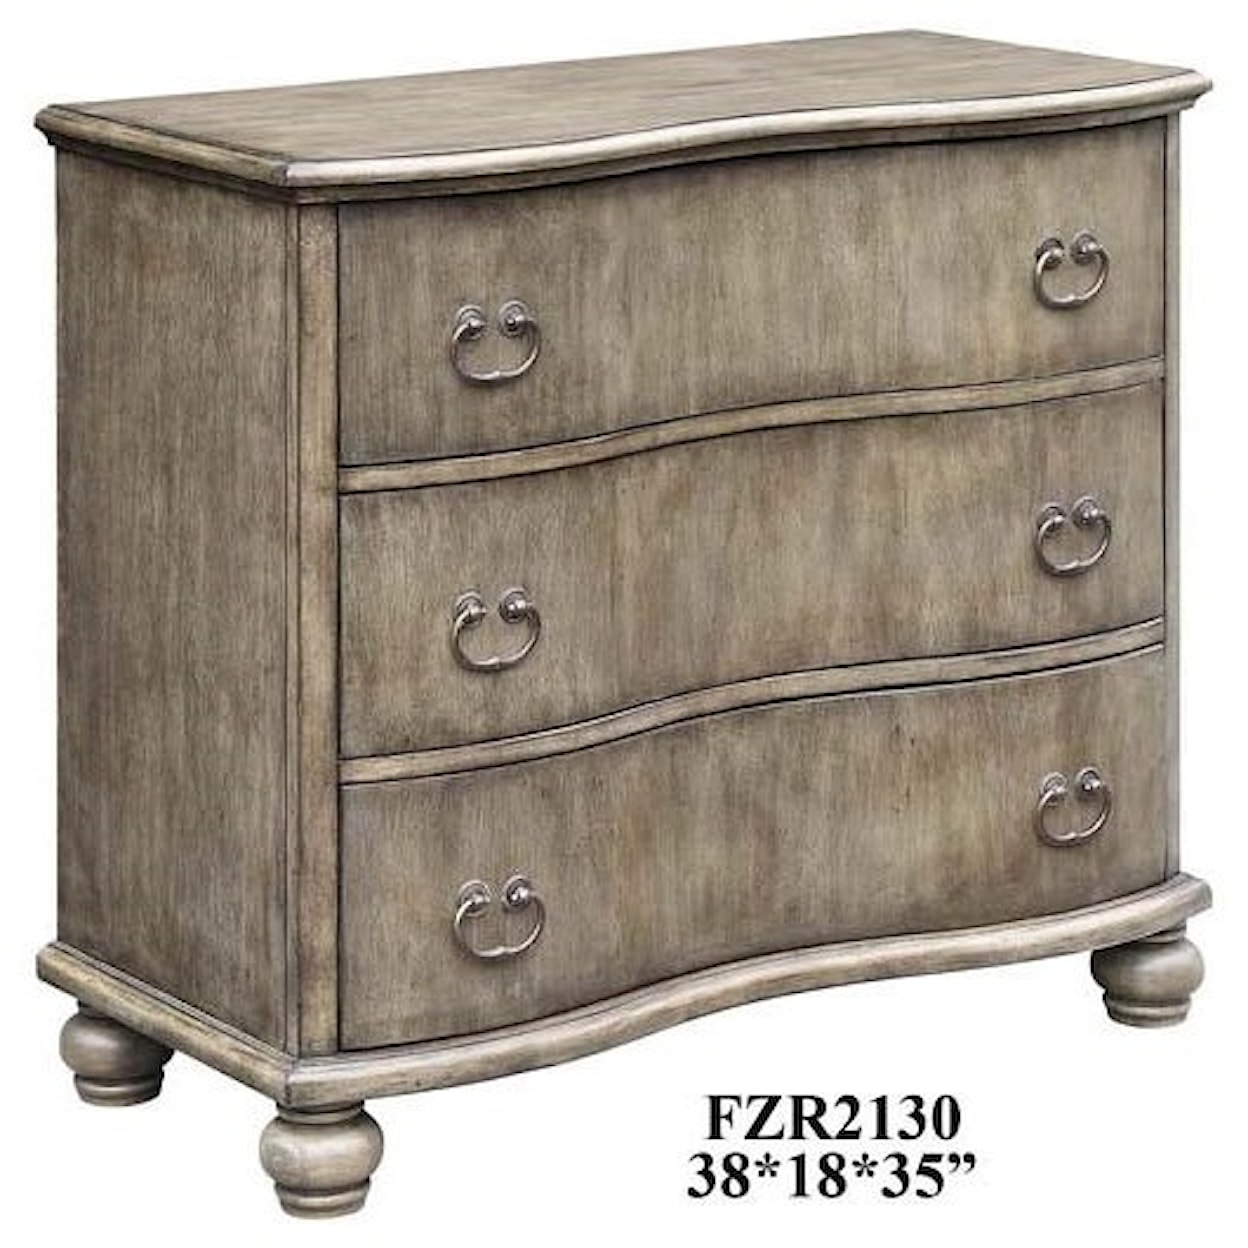 Crestview Collection Accent Furniture Hamilton Curved 3 Drawer Chest in Heritage B